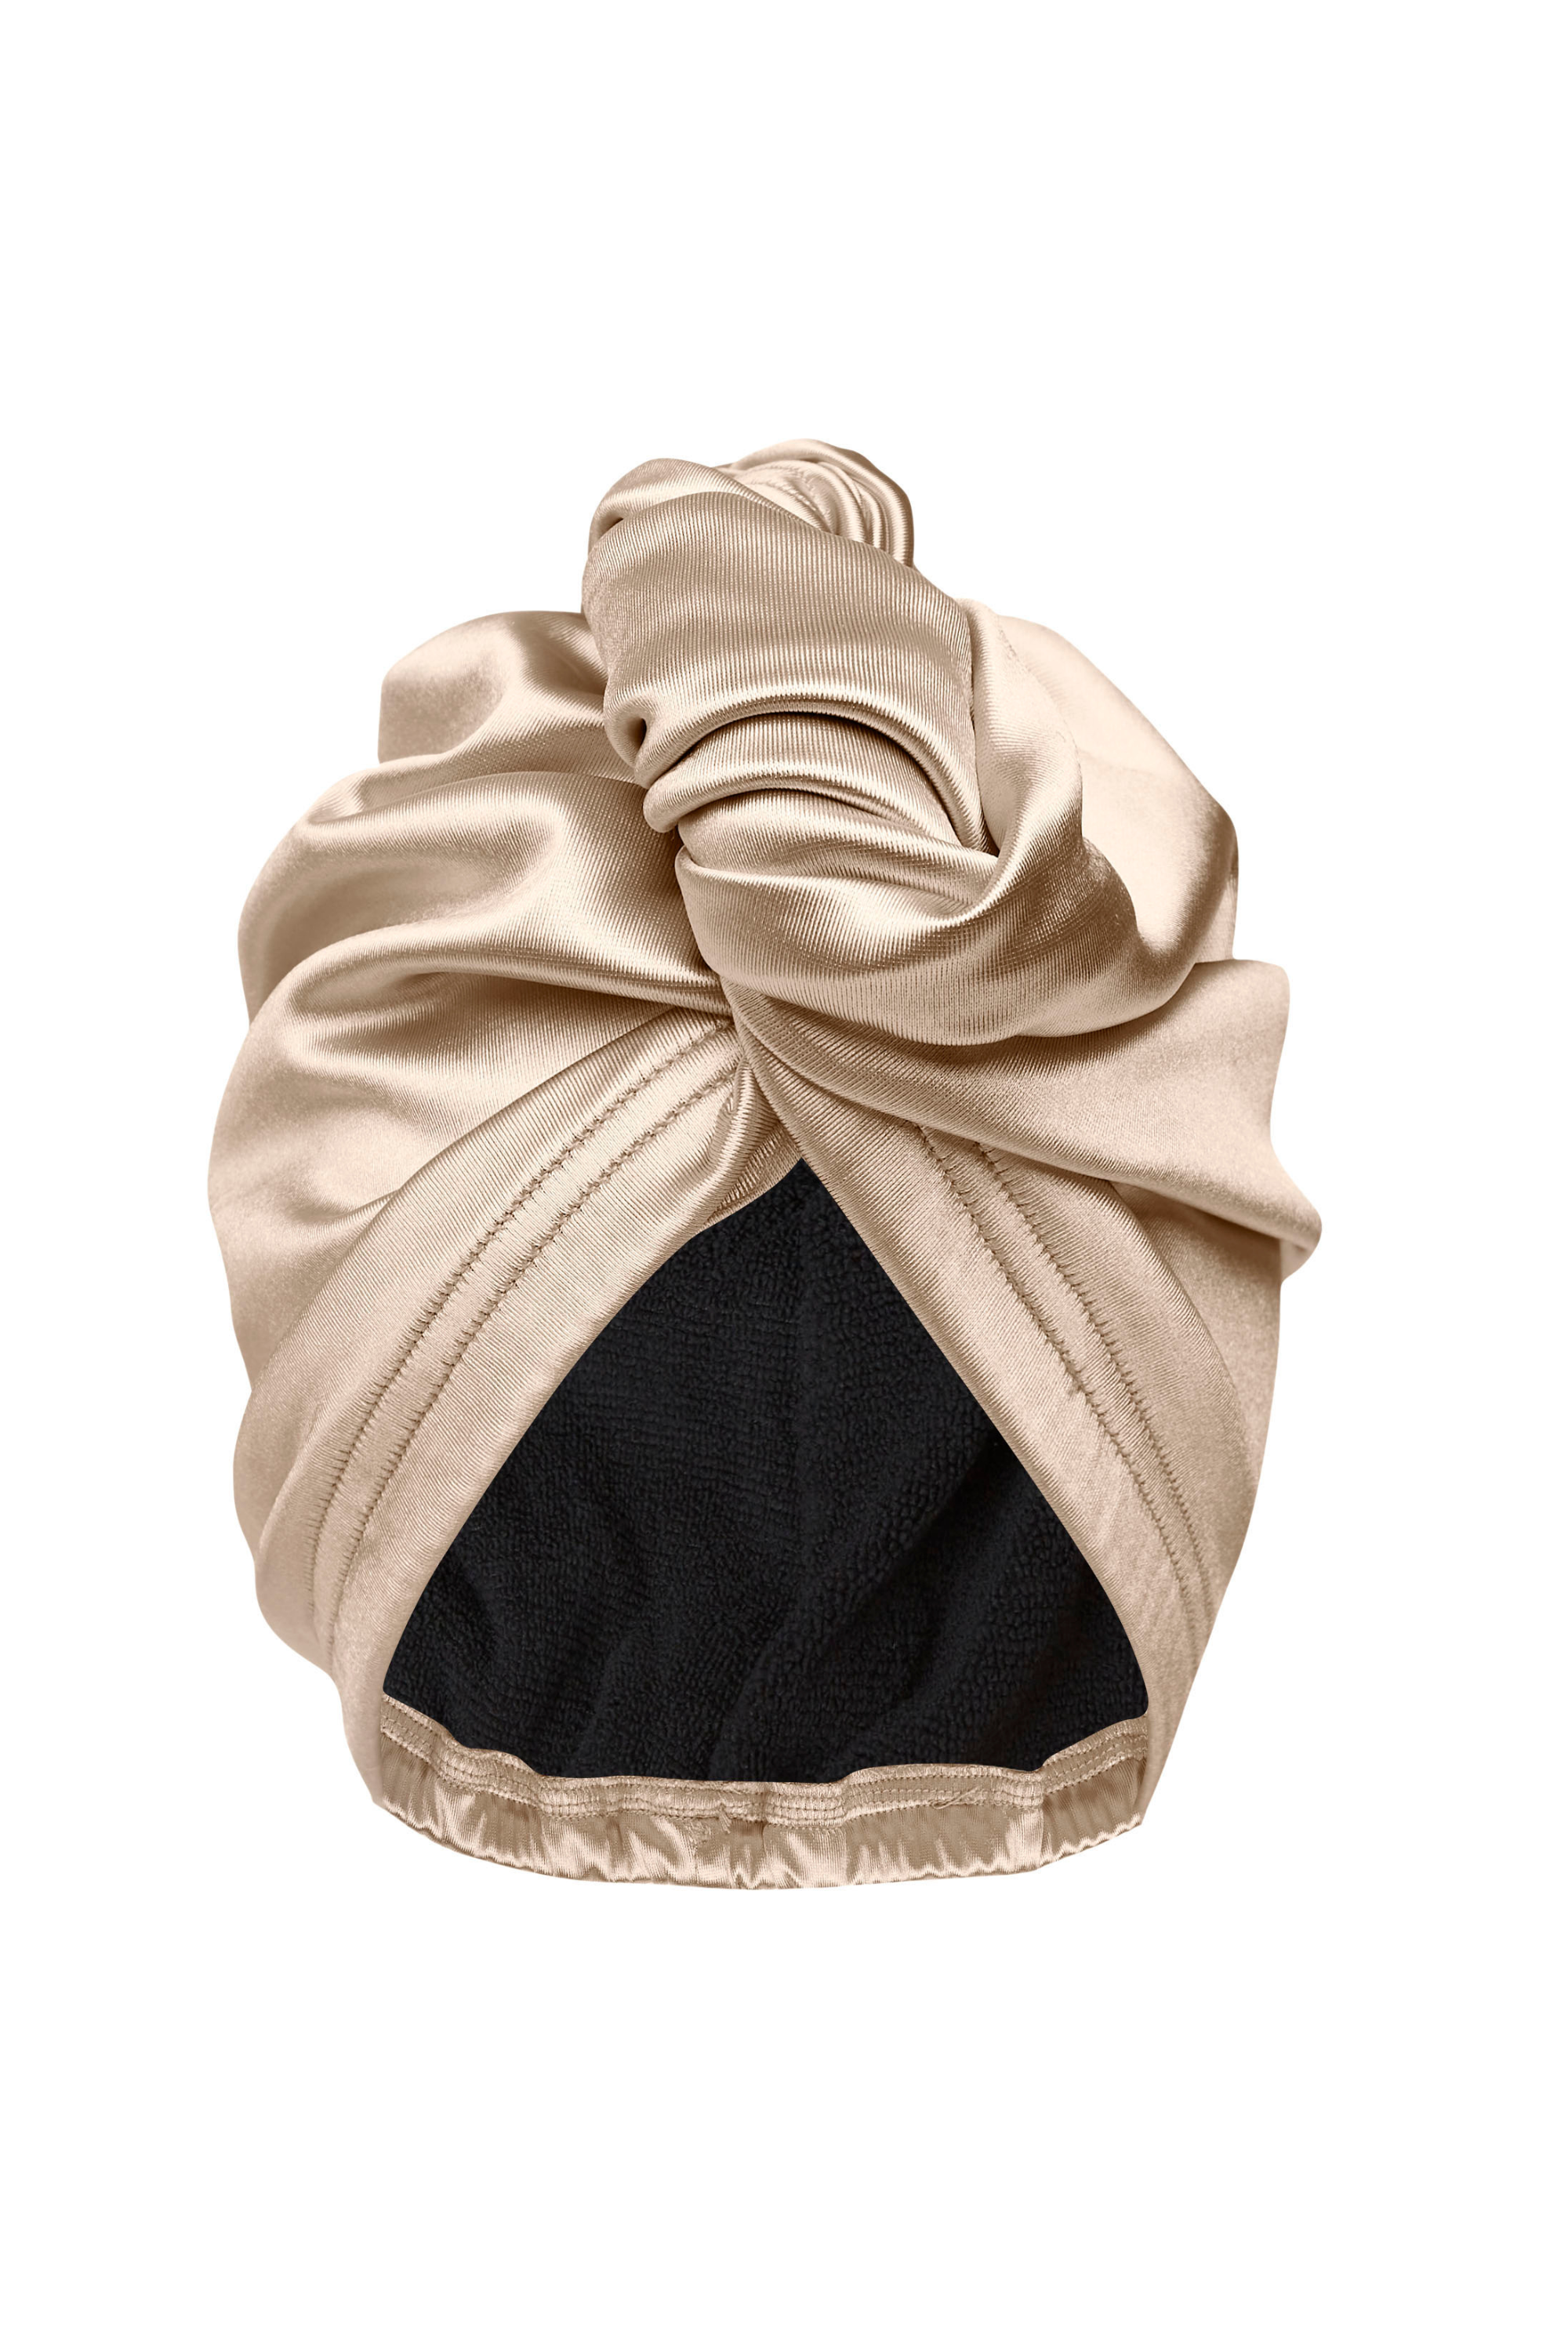 Champagne Gold Quick Dry Hair Wrap - MUAVES